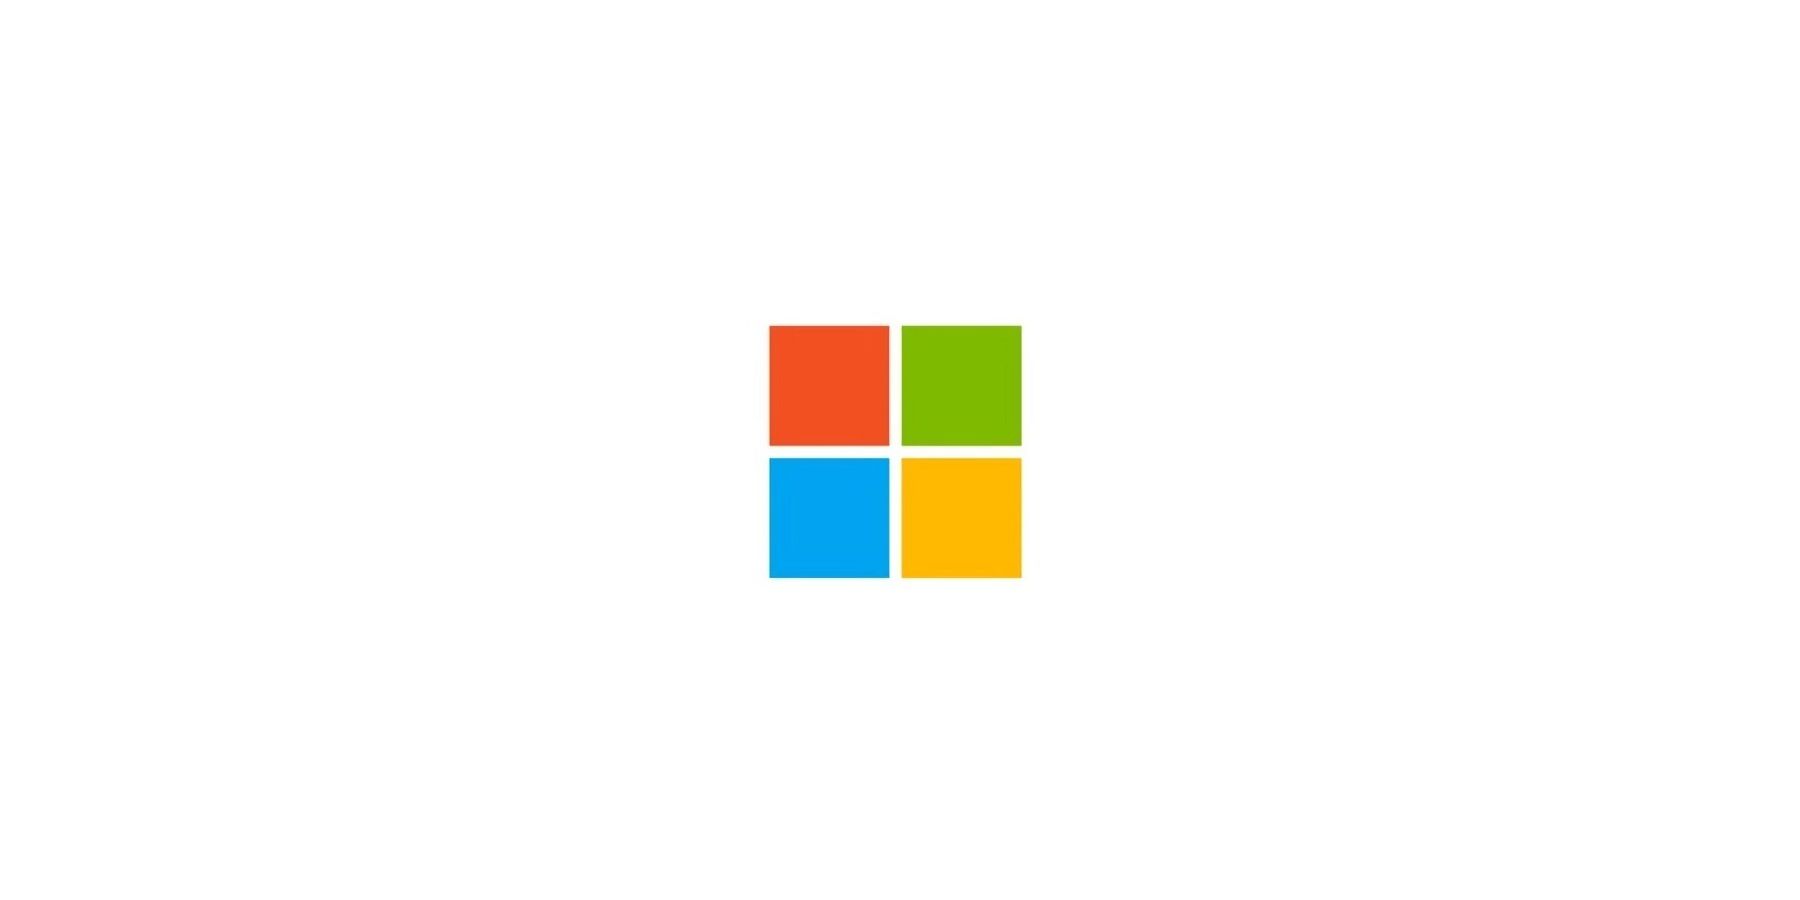 Microsoft-Logo-Clean-Simple-Off-White-Background